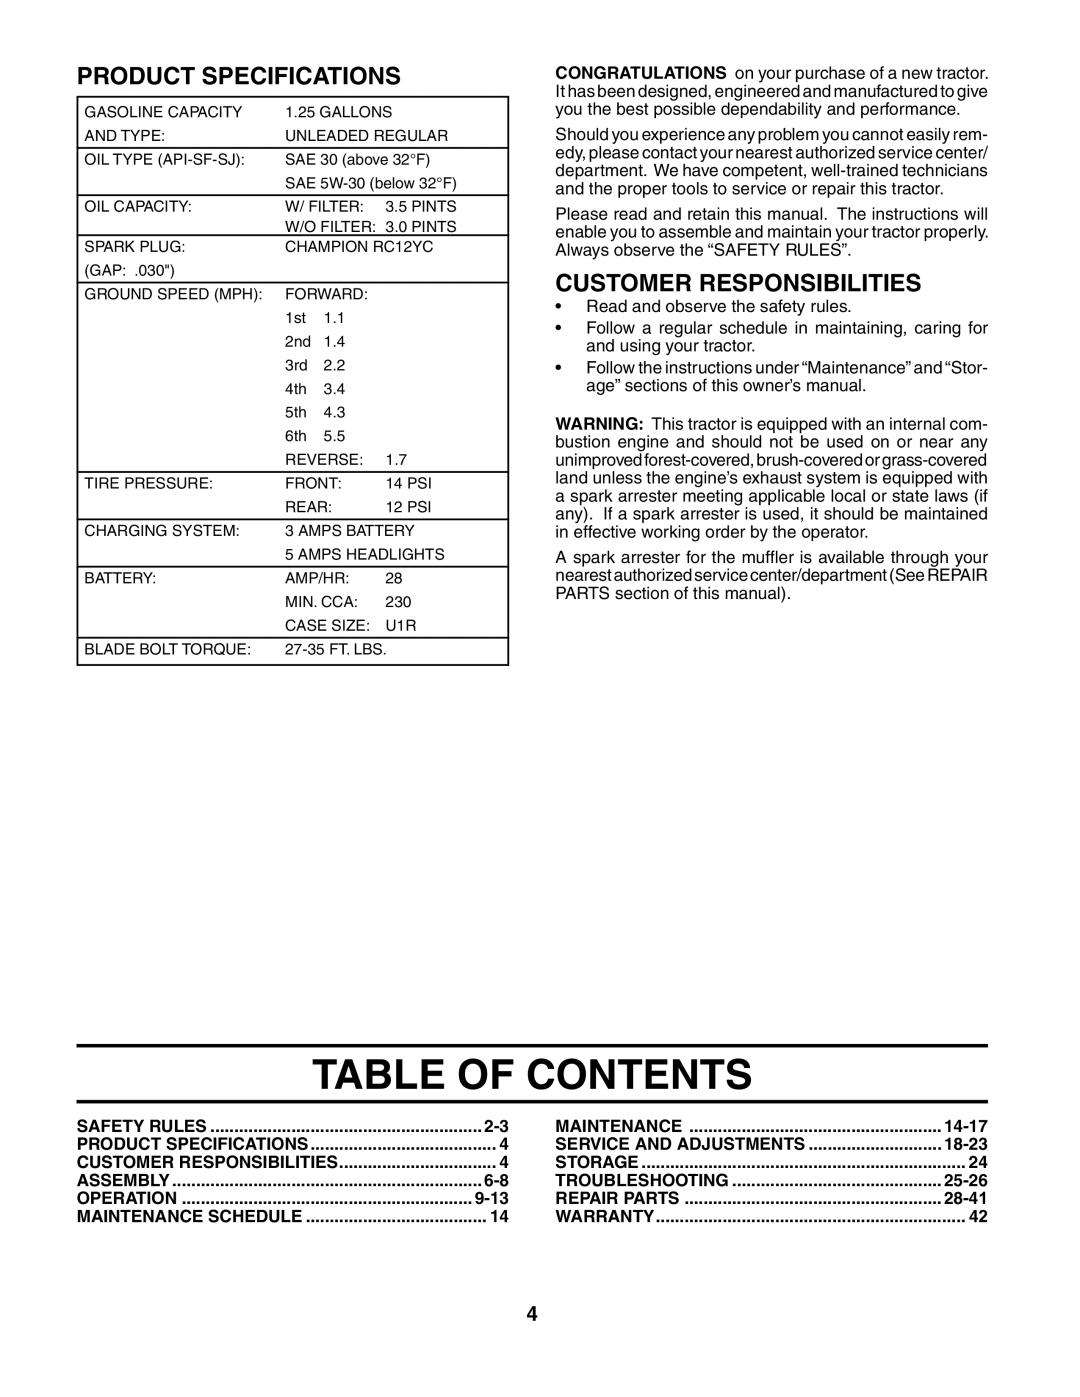 Poulan 187594 manual Table Of Contents, Product Specifications, Customer Responsibilities 